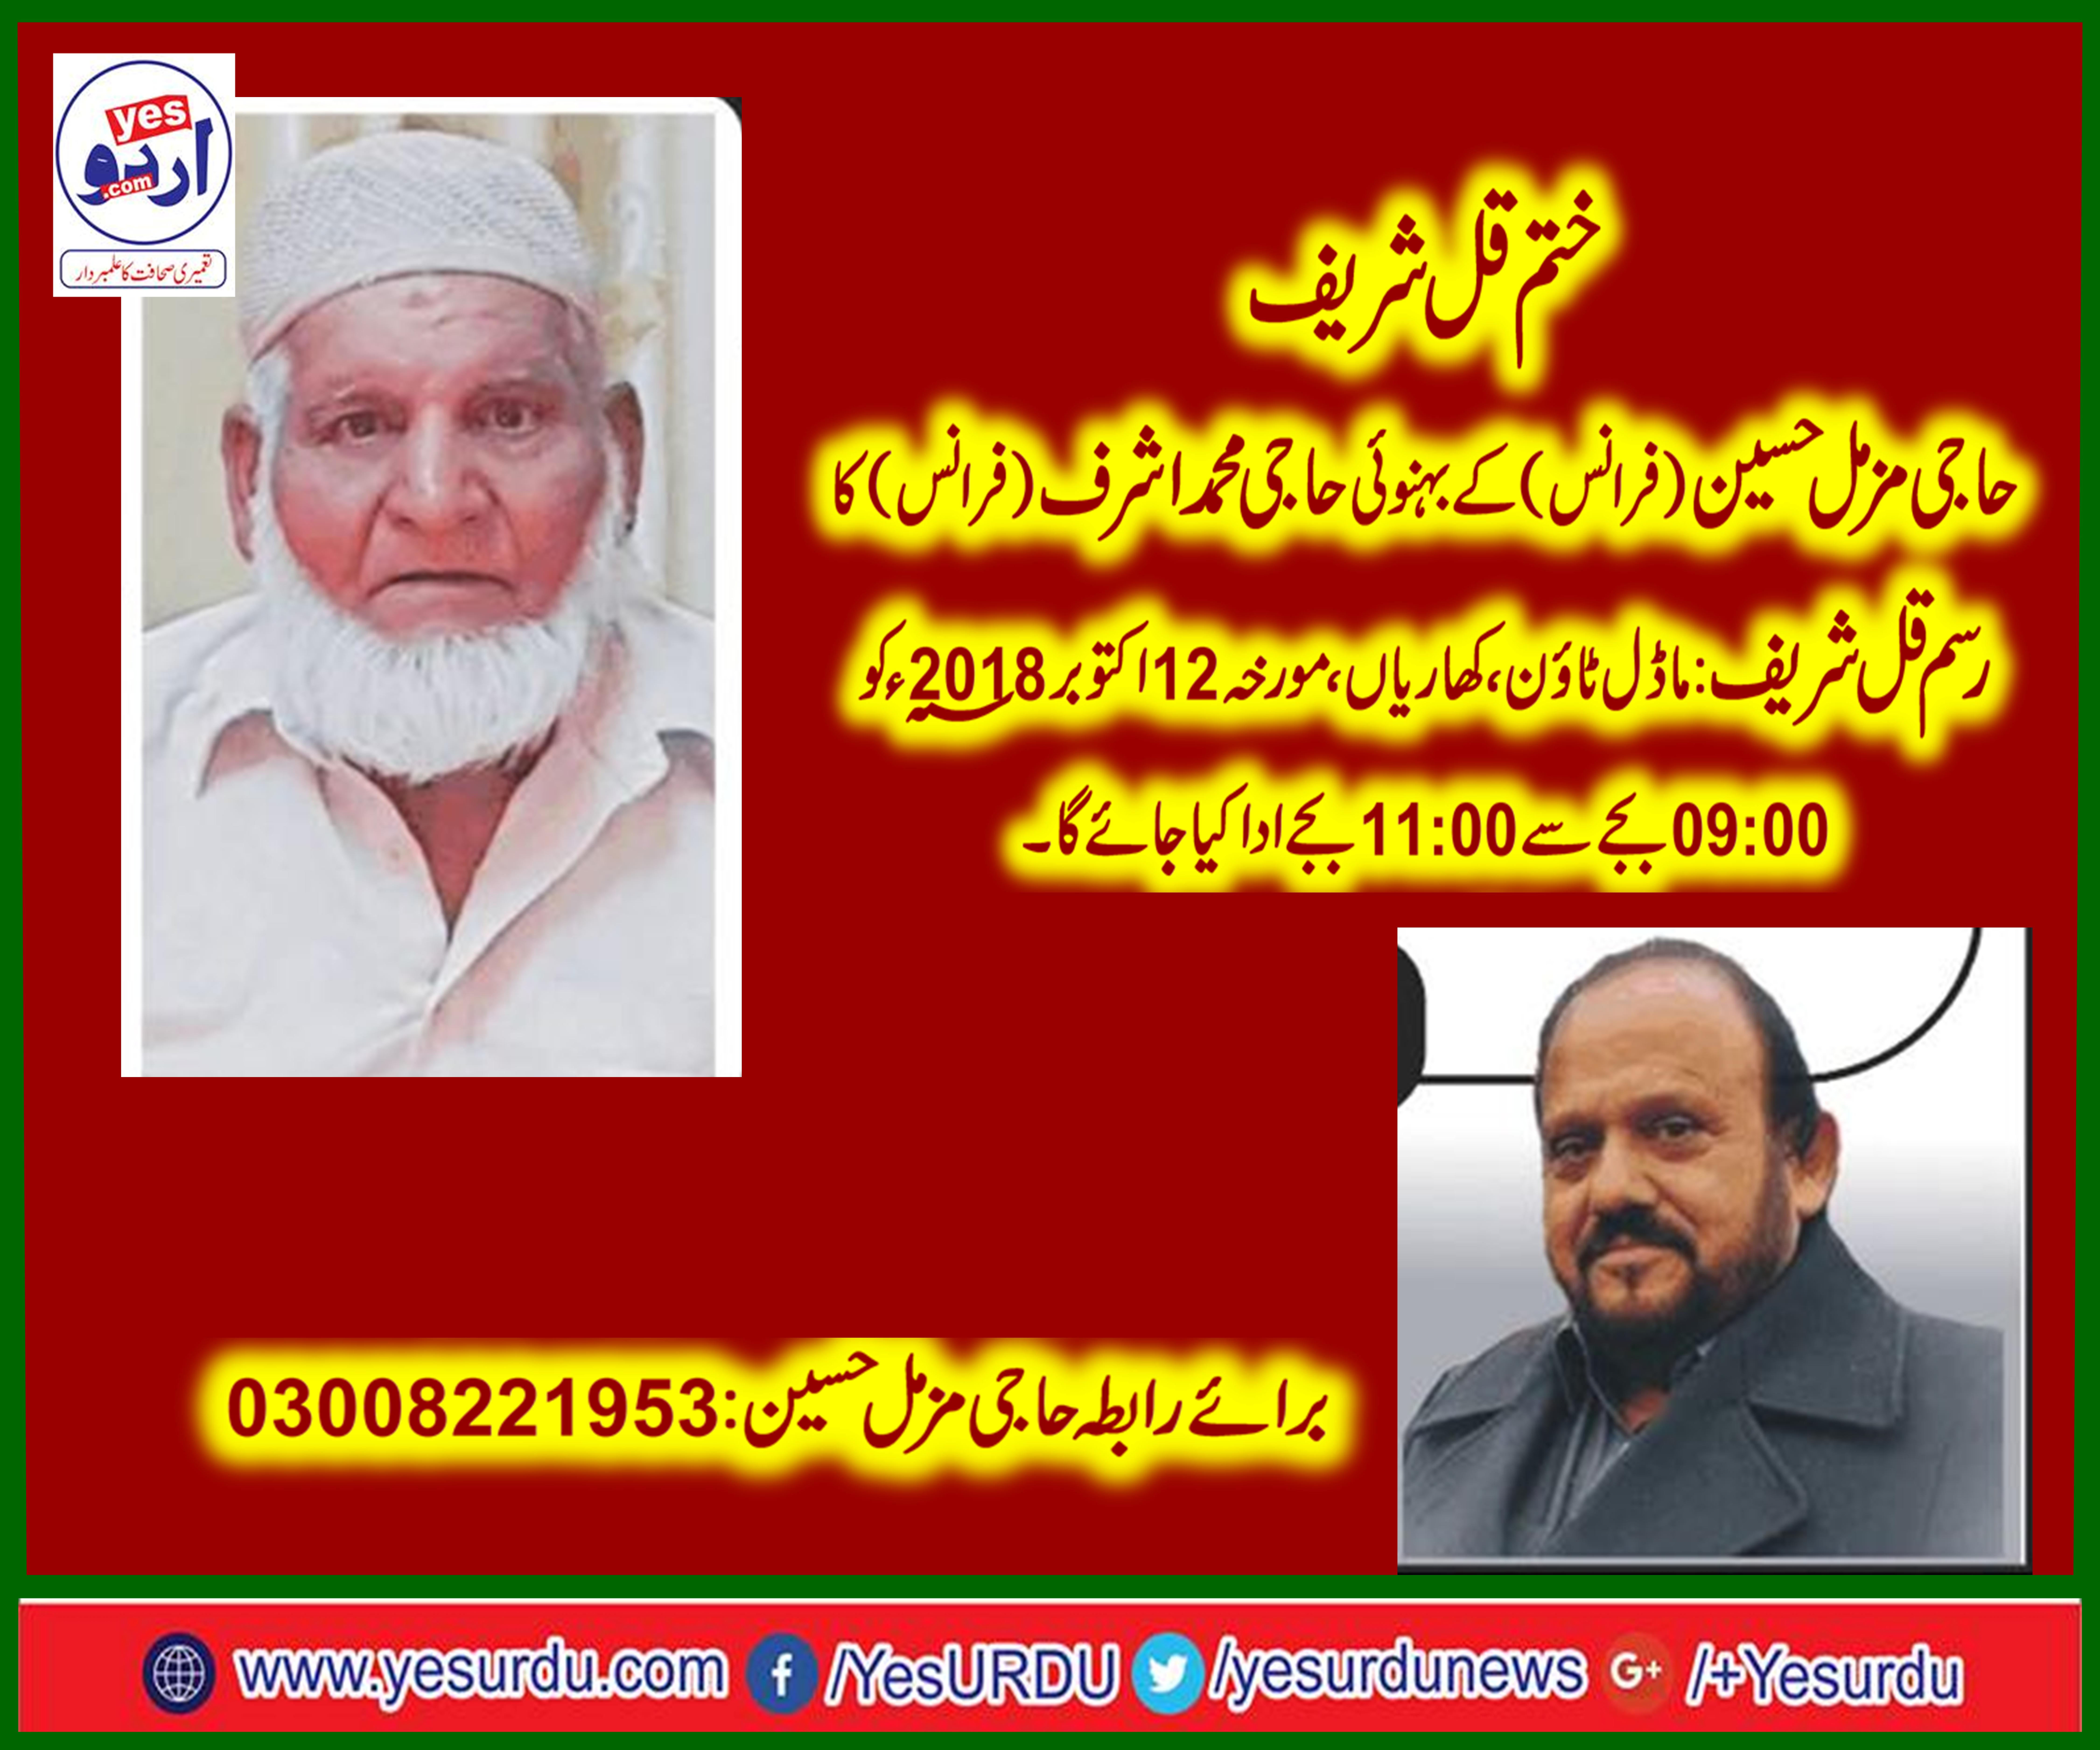 tradition-of-funeral-third-dua-will-be-performed-for-haji-muhammad-ashraf-brother-in-law-of-haji-muzzamil-hussain-at-kharian